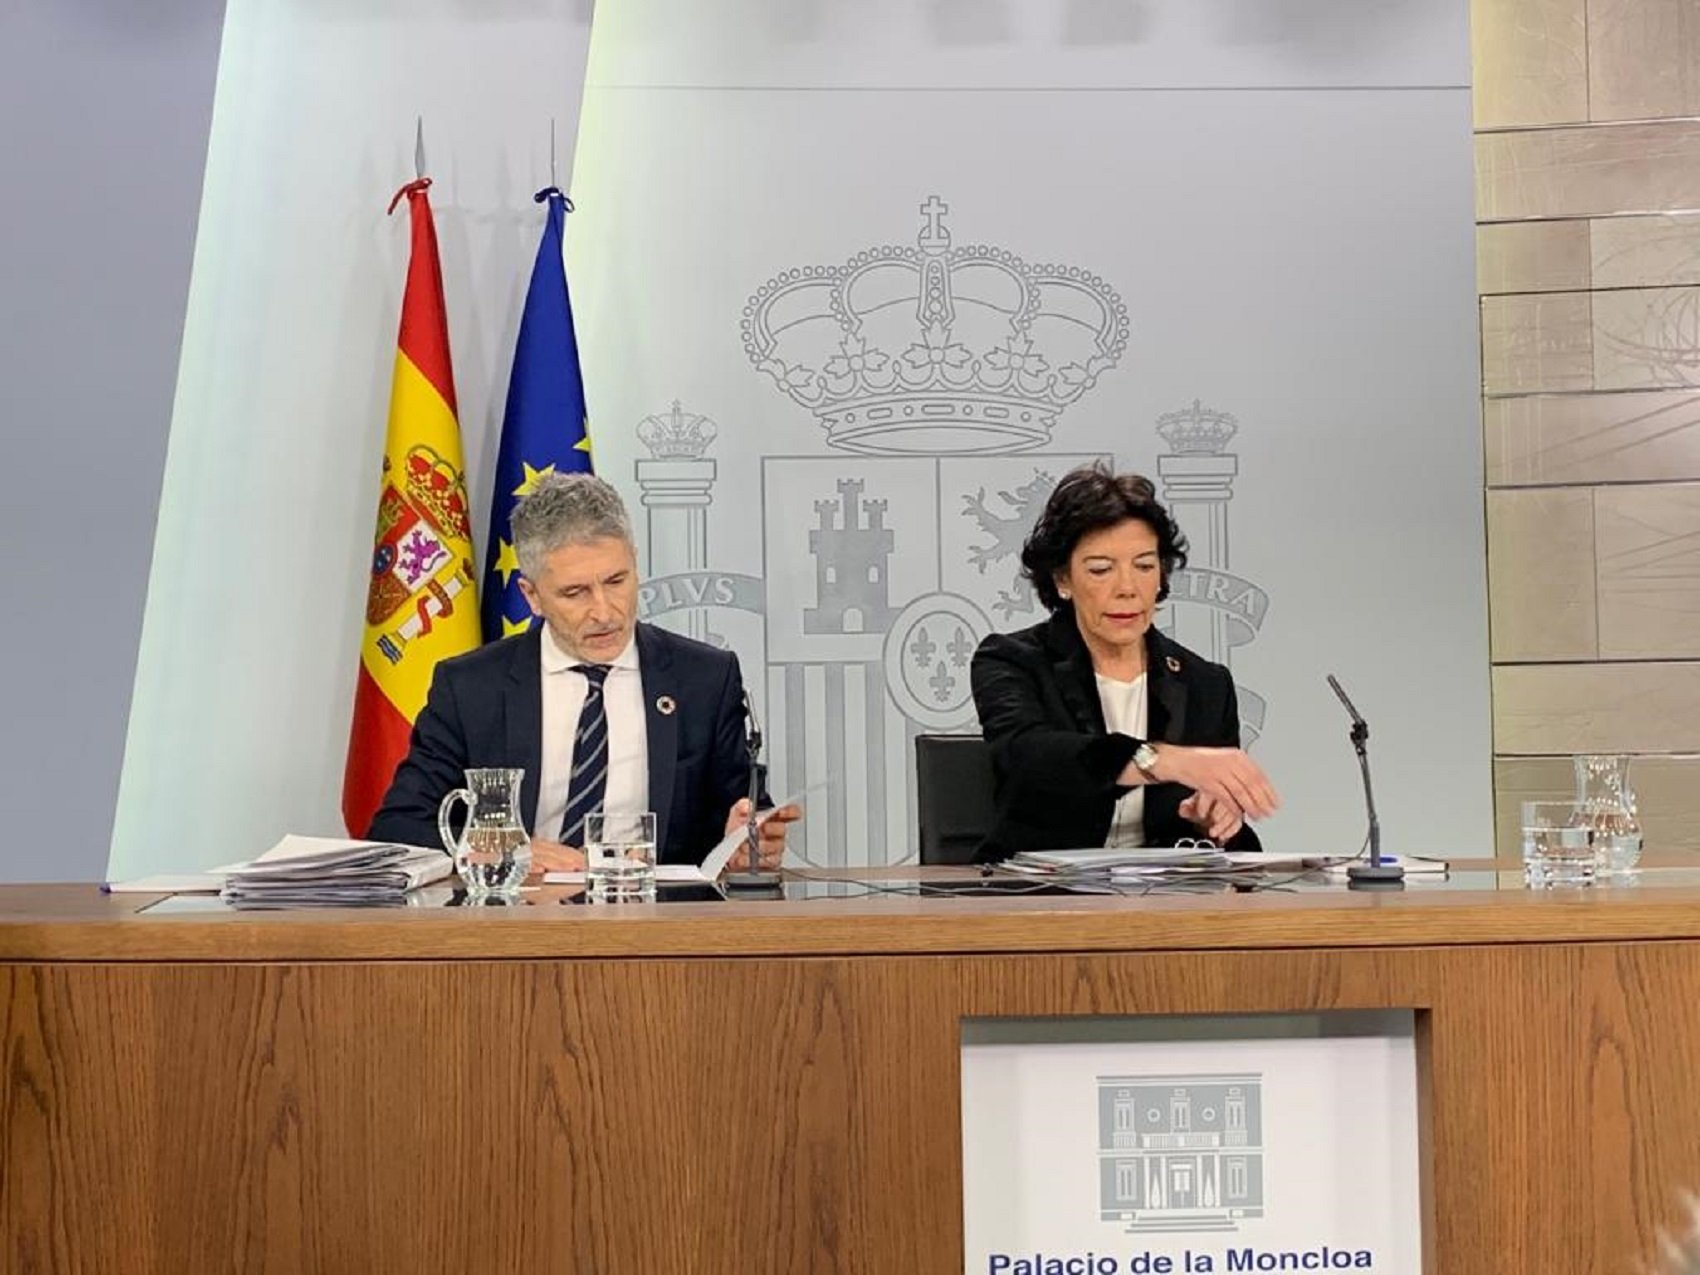 Spanish government on idea from Extremadura: "It would be a usurpation of power"